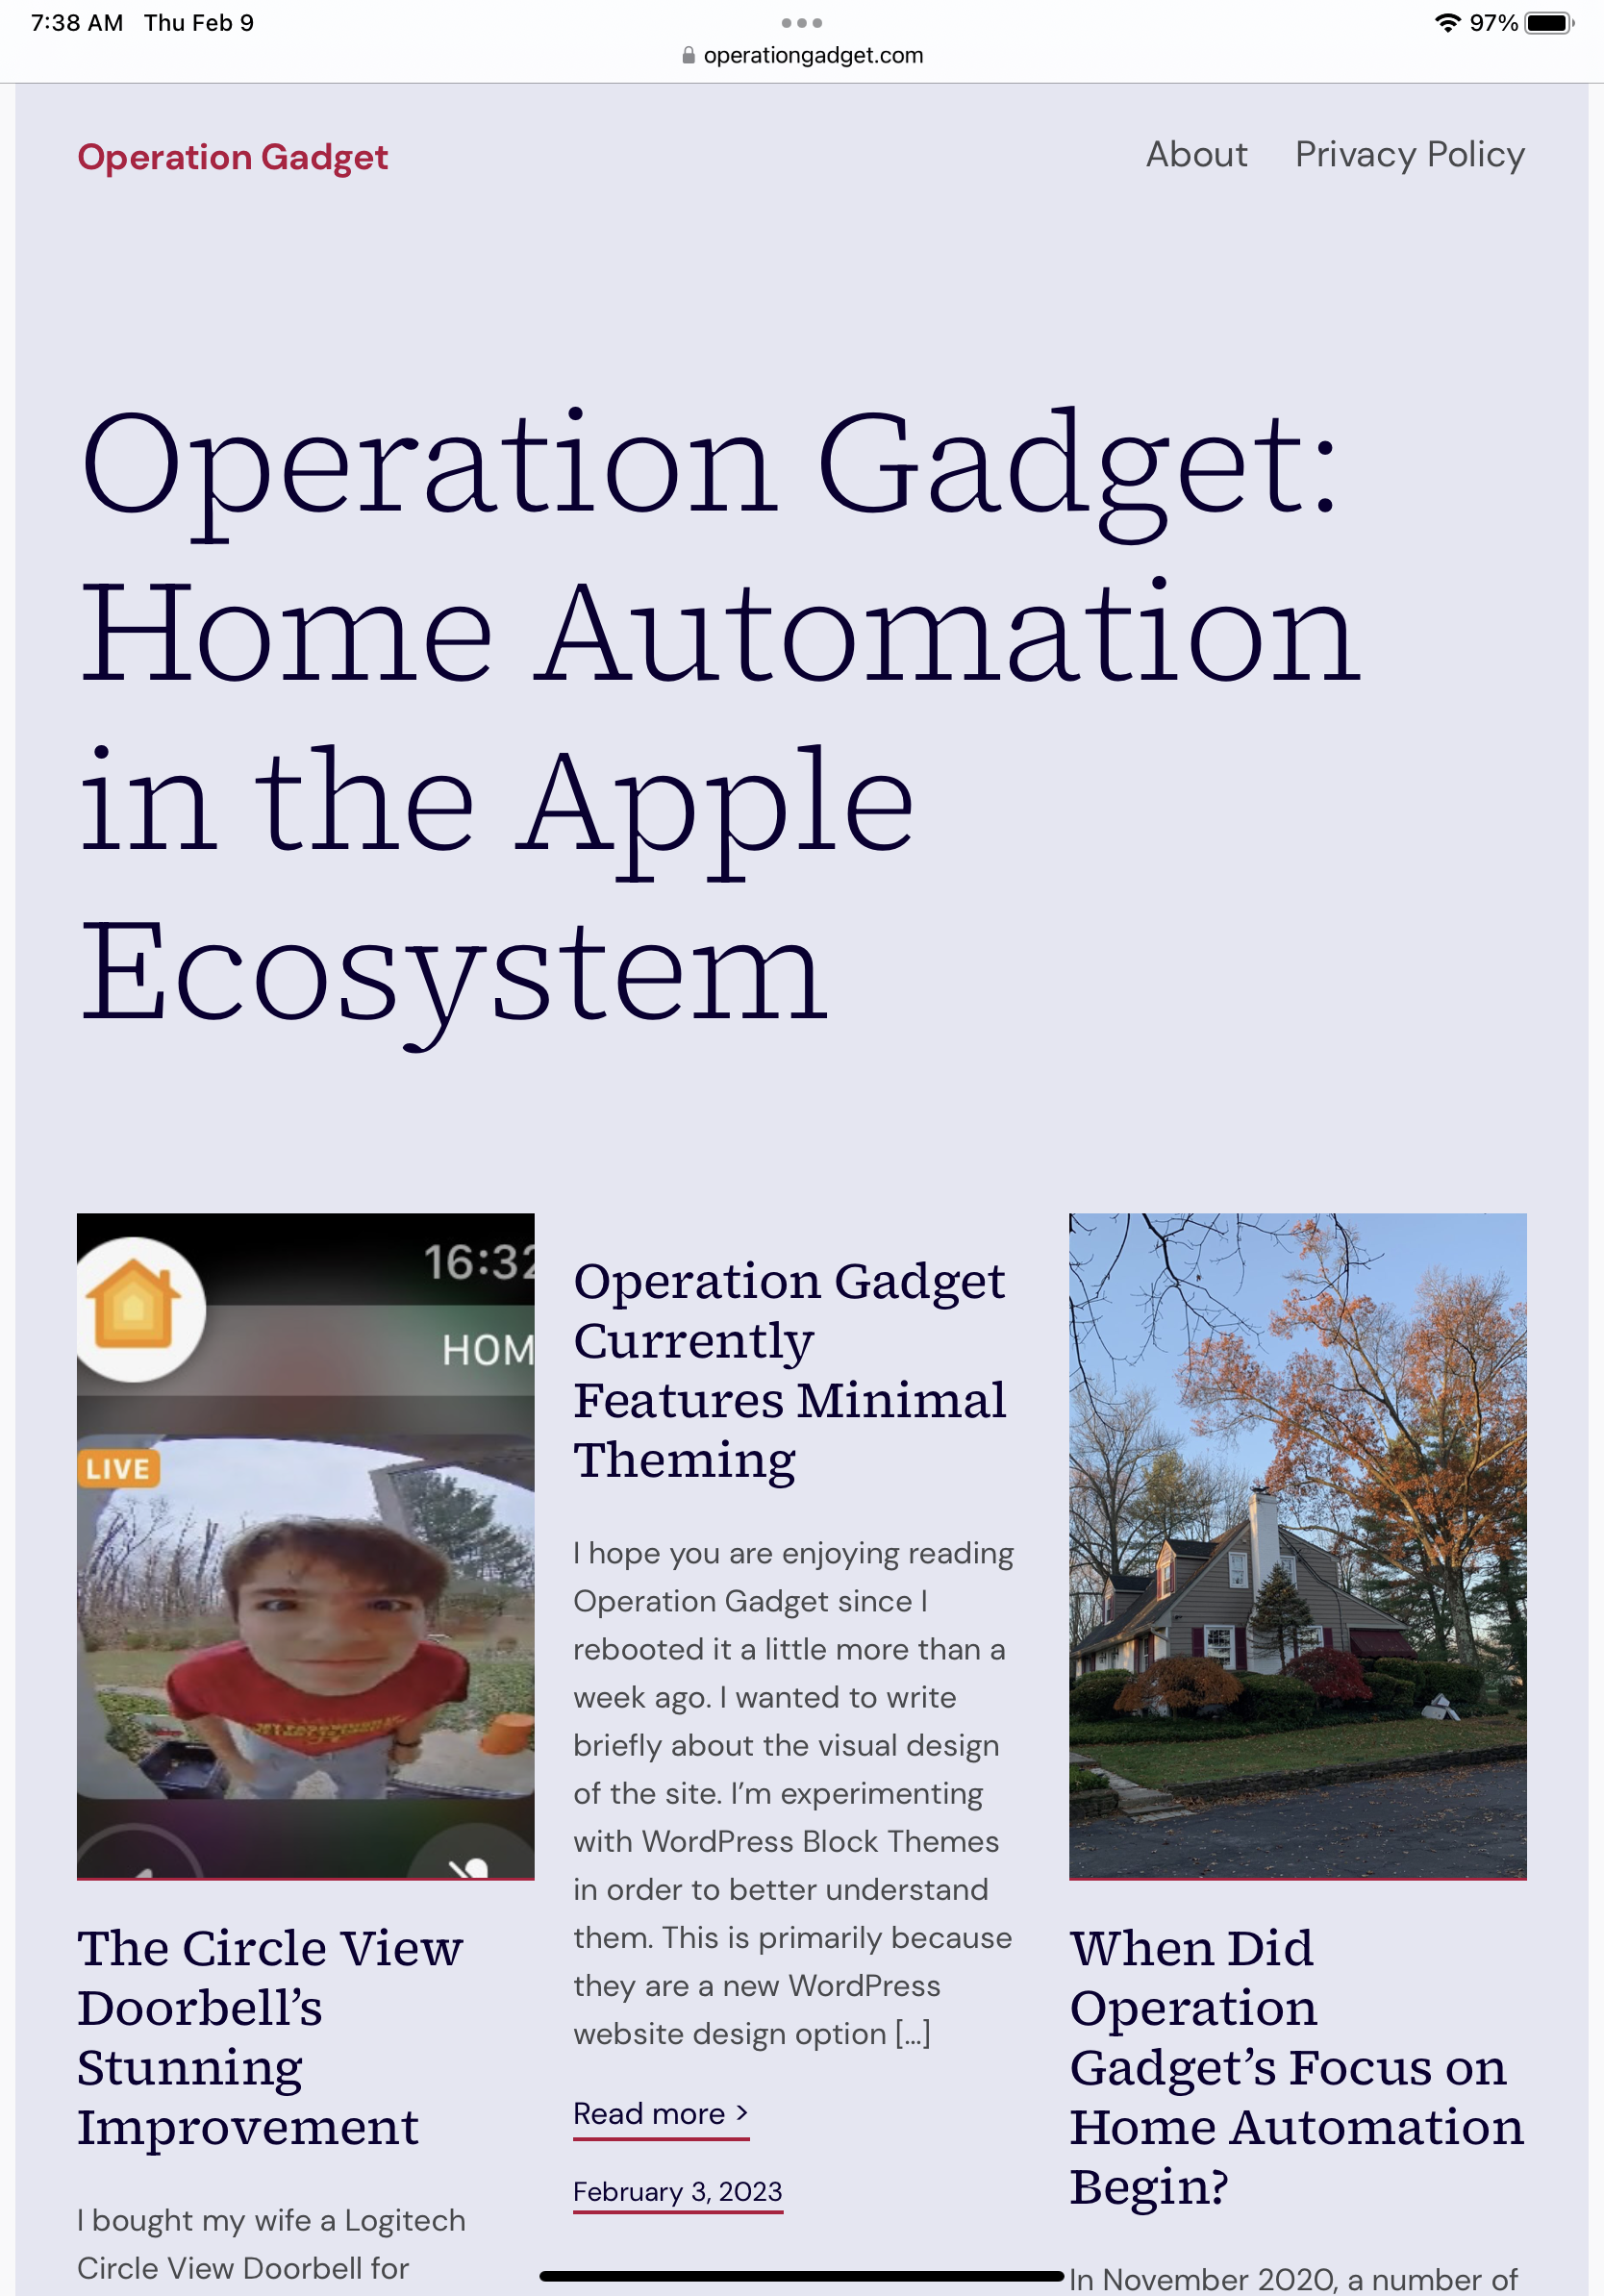 Operation Gadget Currently Features Minimal Theming